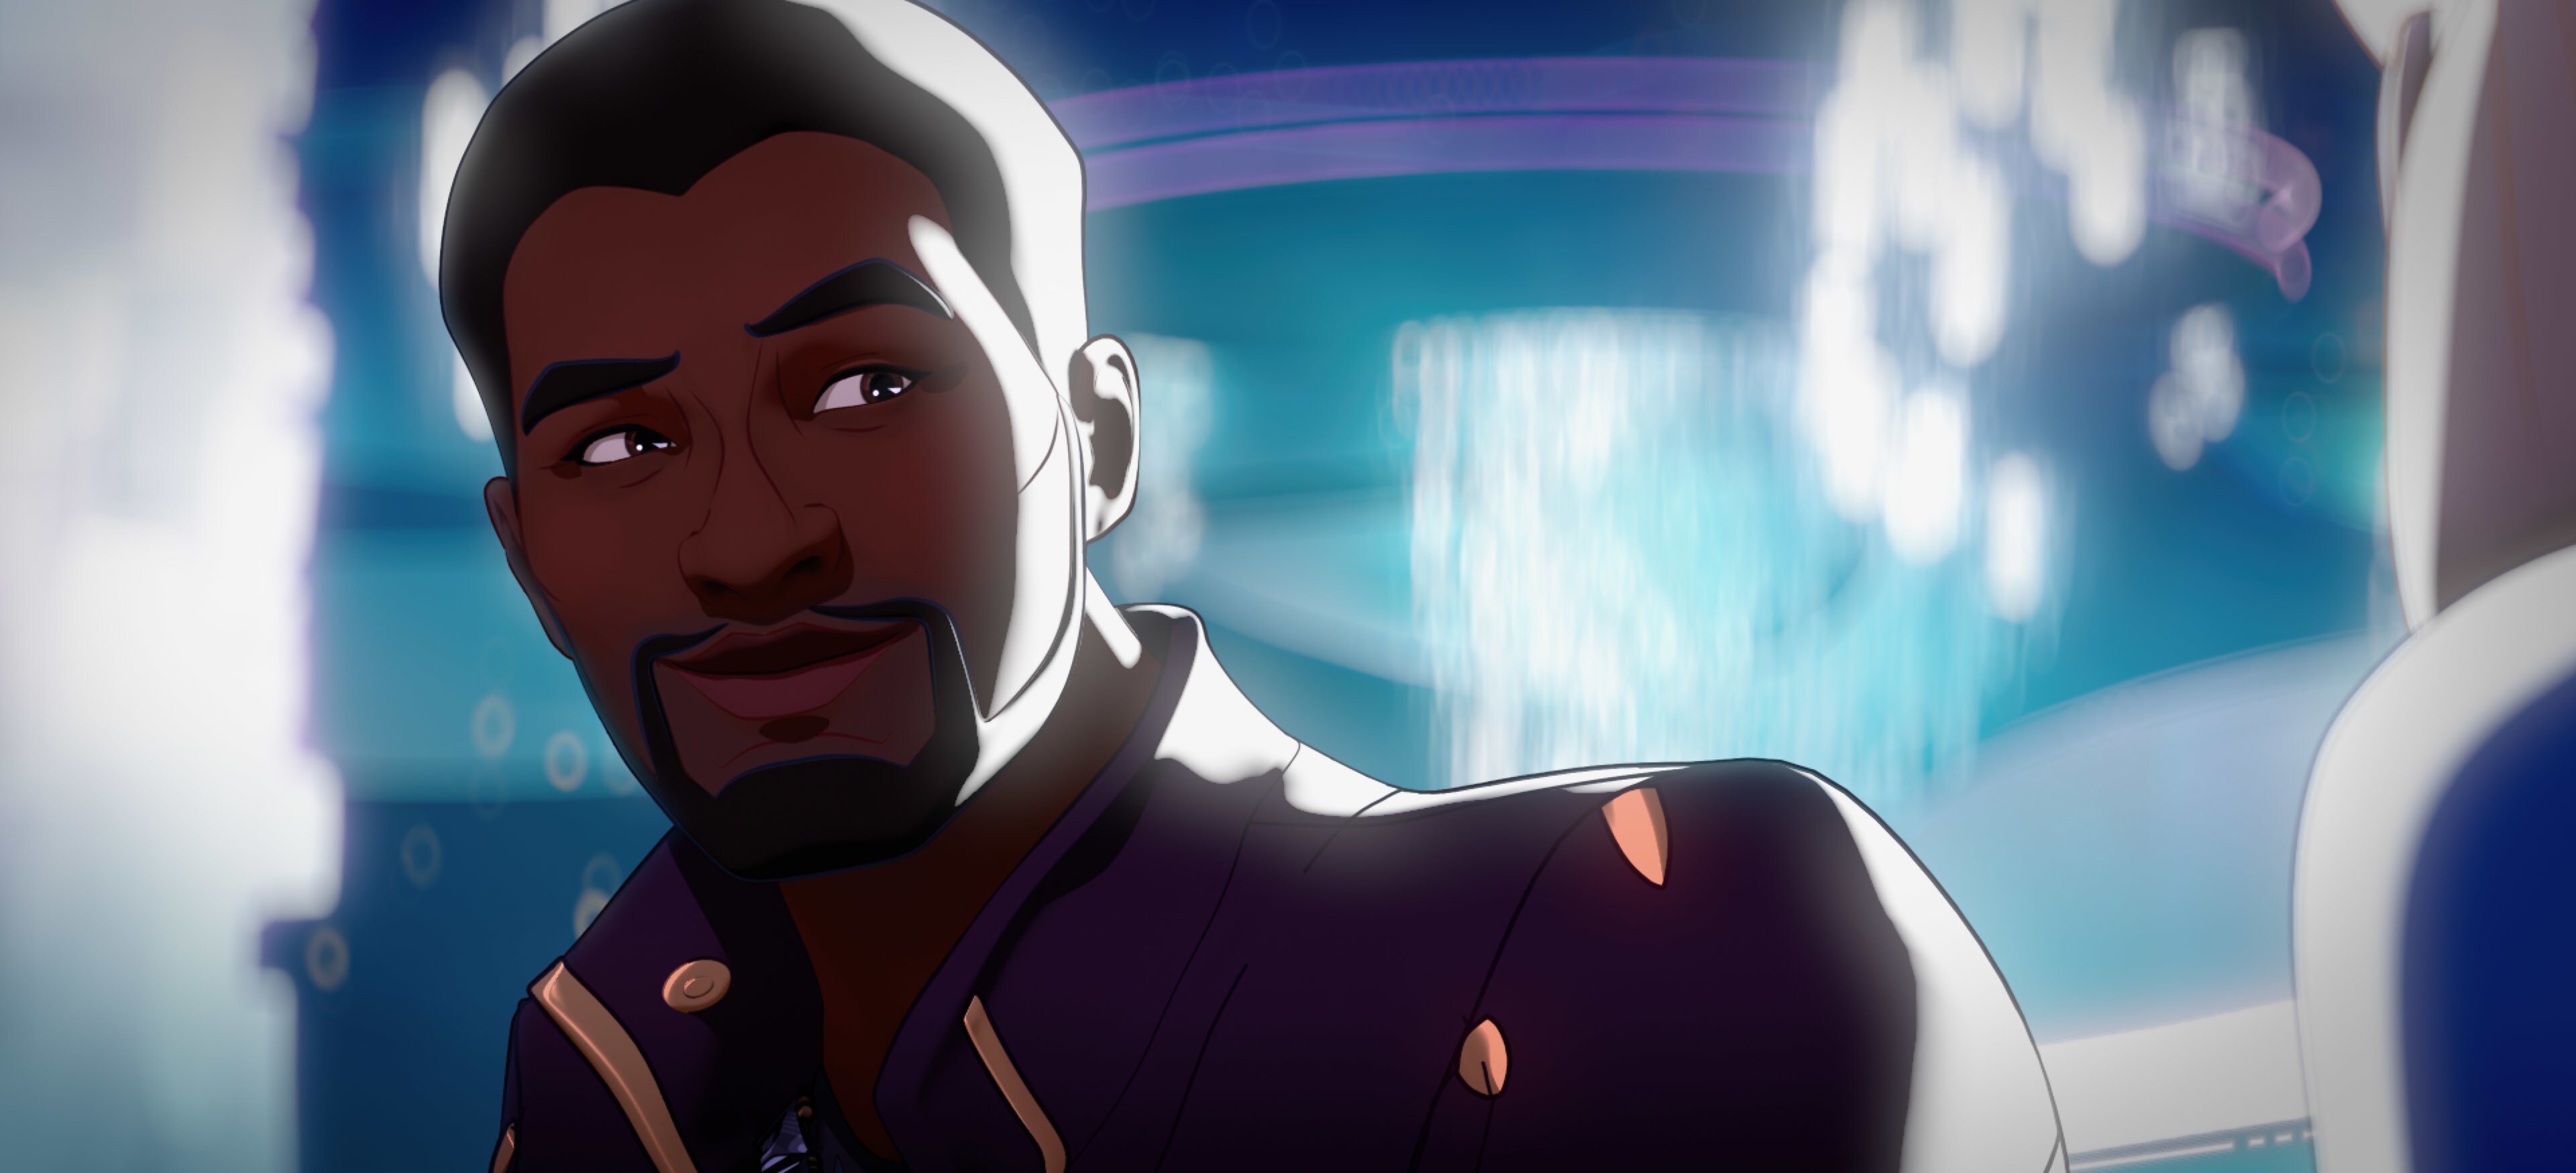 T’Challa/Star-Lord in Marvel Studios' WHAT IF…? exclusively on Disney+. ©Marvel Studios 2021. All Rights Reserved.